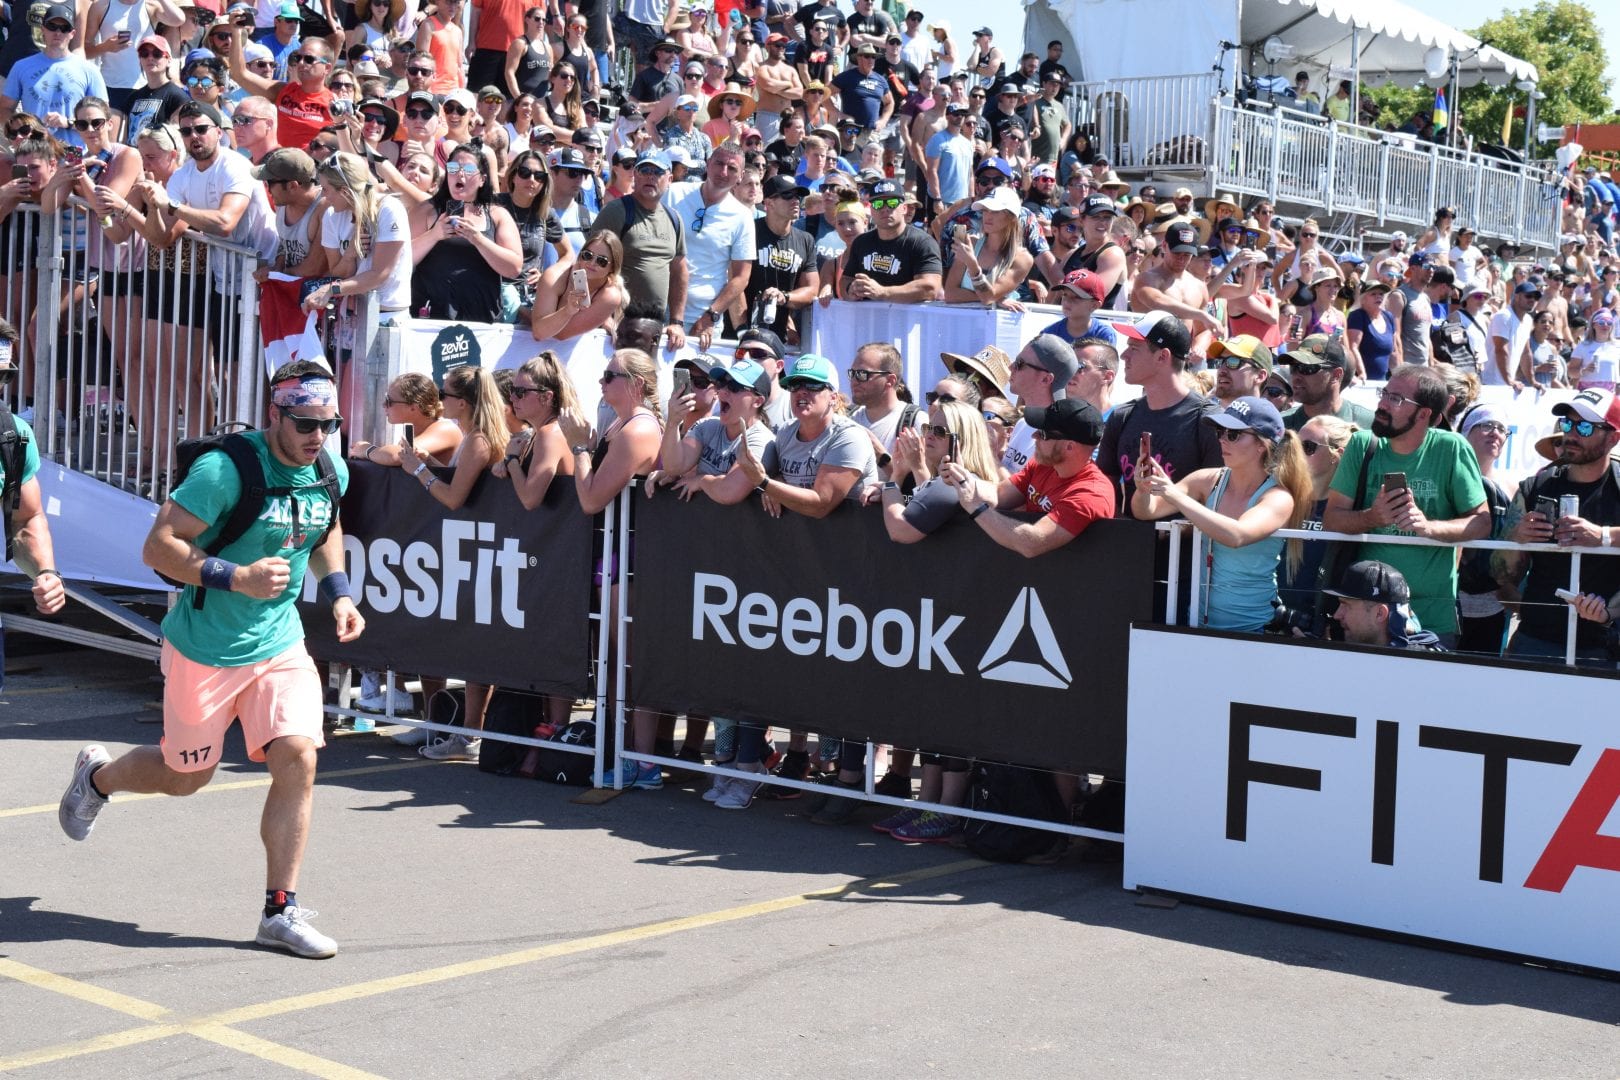 Jeffrey Adler completes the Ruck Run event at the 2019 CrossFit Games